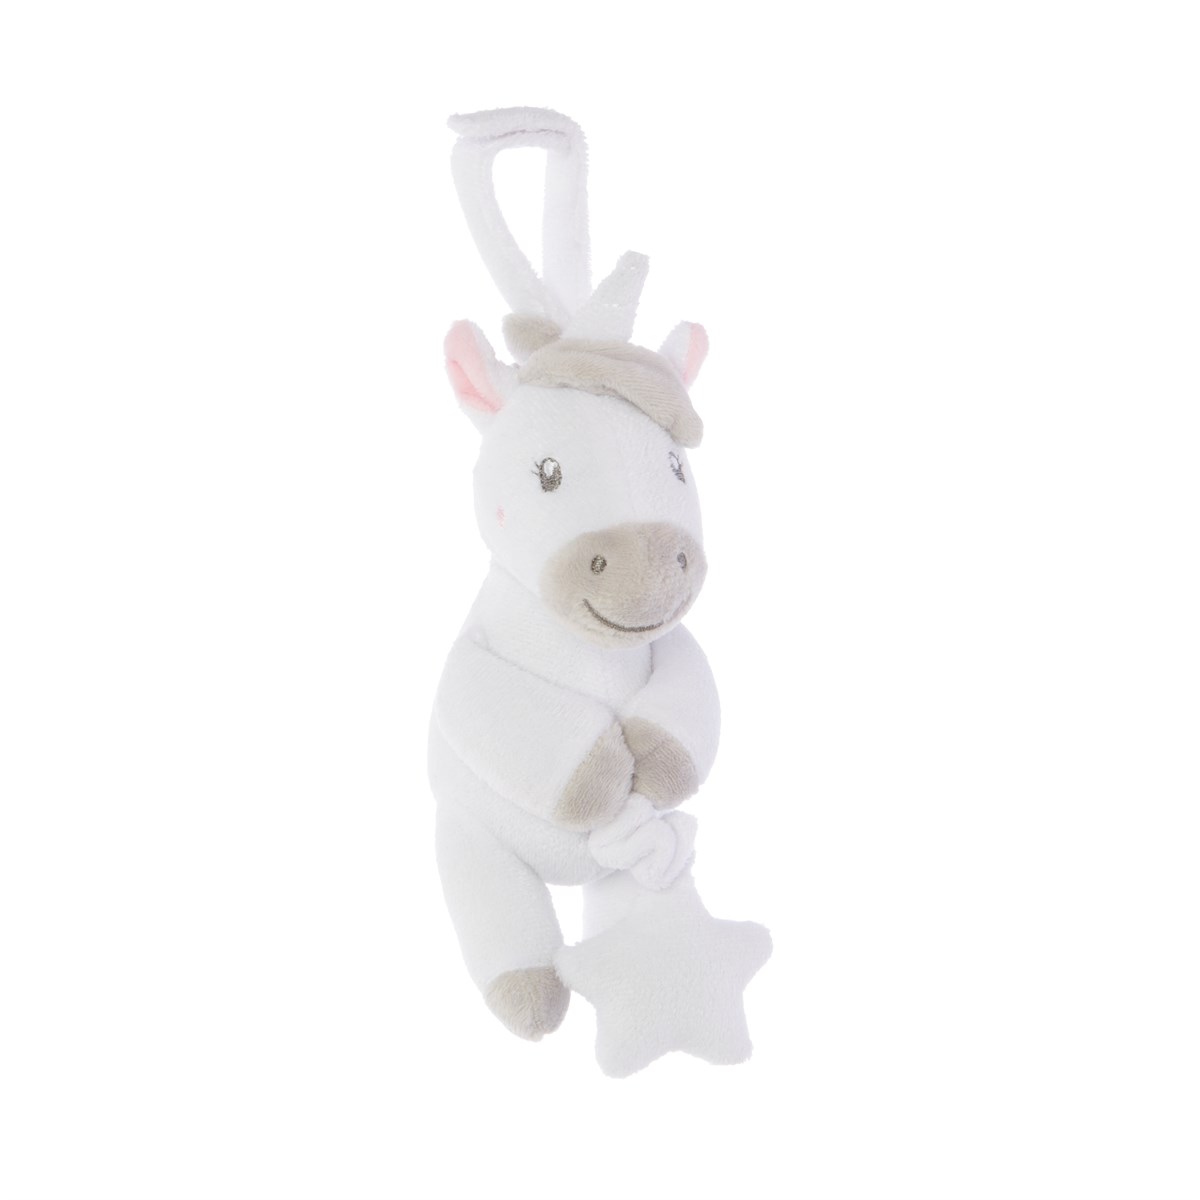 JOLY001_A_DreamingUnicorn_PullDownToy_Front